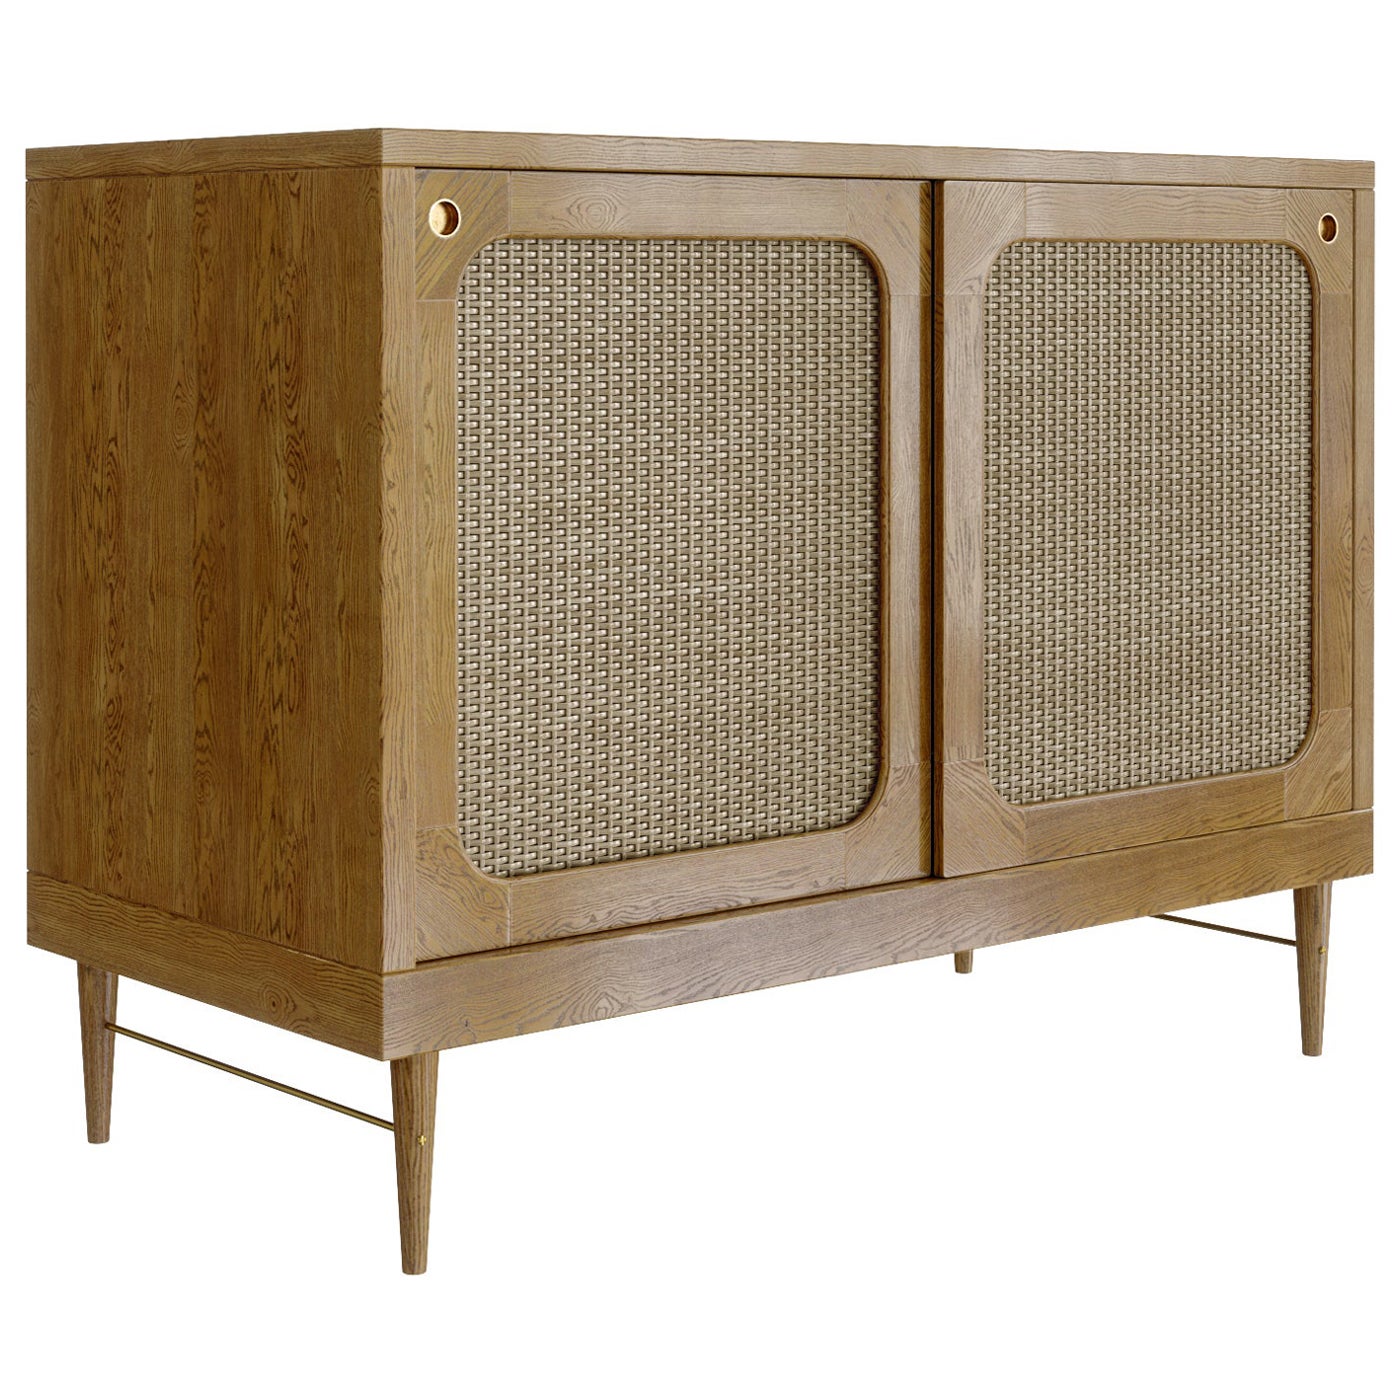 Sanders Sideboard in Natural Oak and Rattan — Small